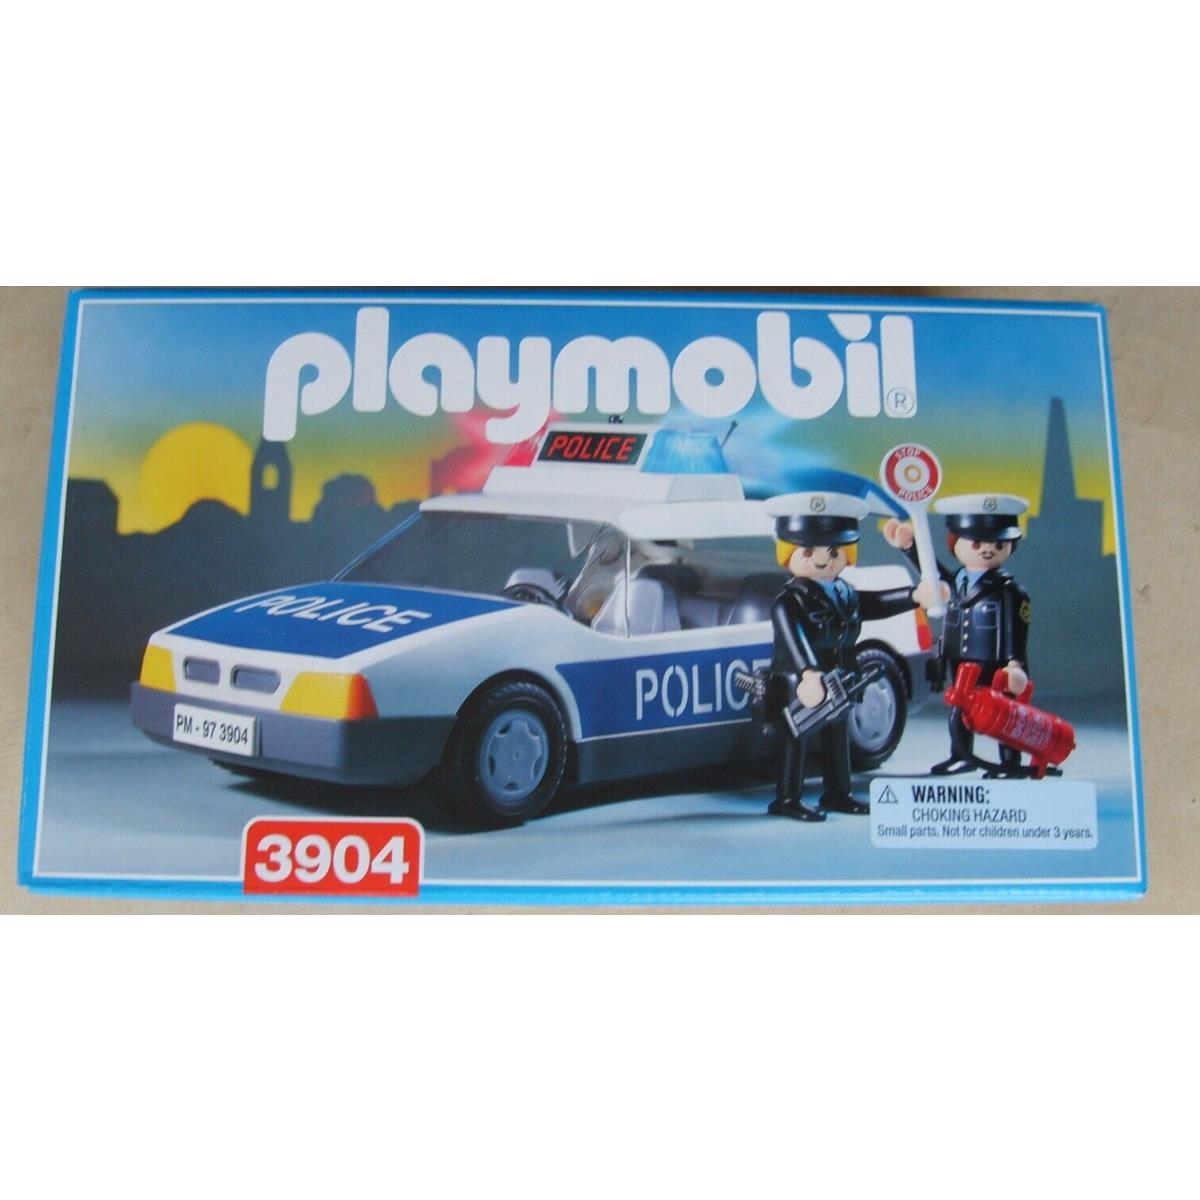 Playmobil 3904 Police Car Patrol Vehicle with Police Figures Lights